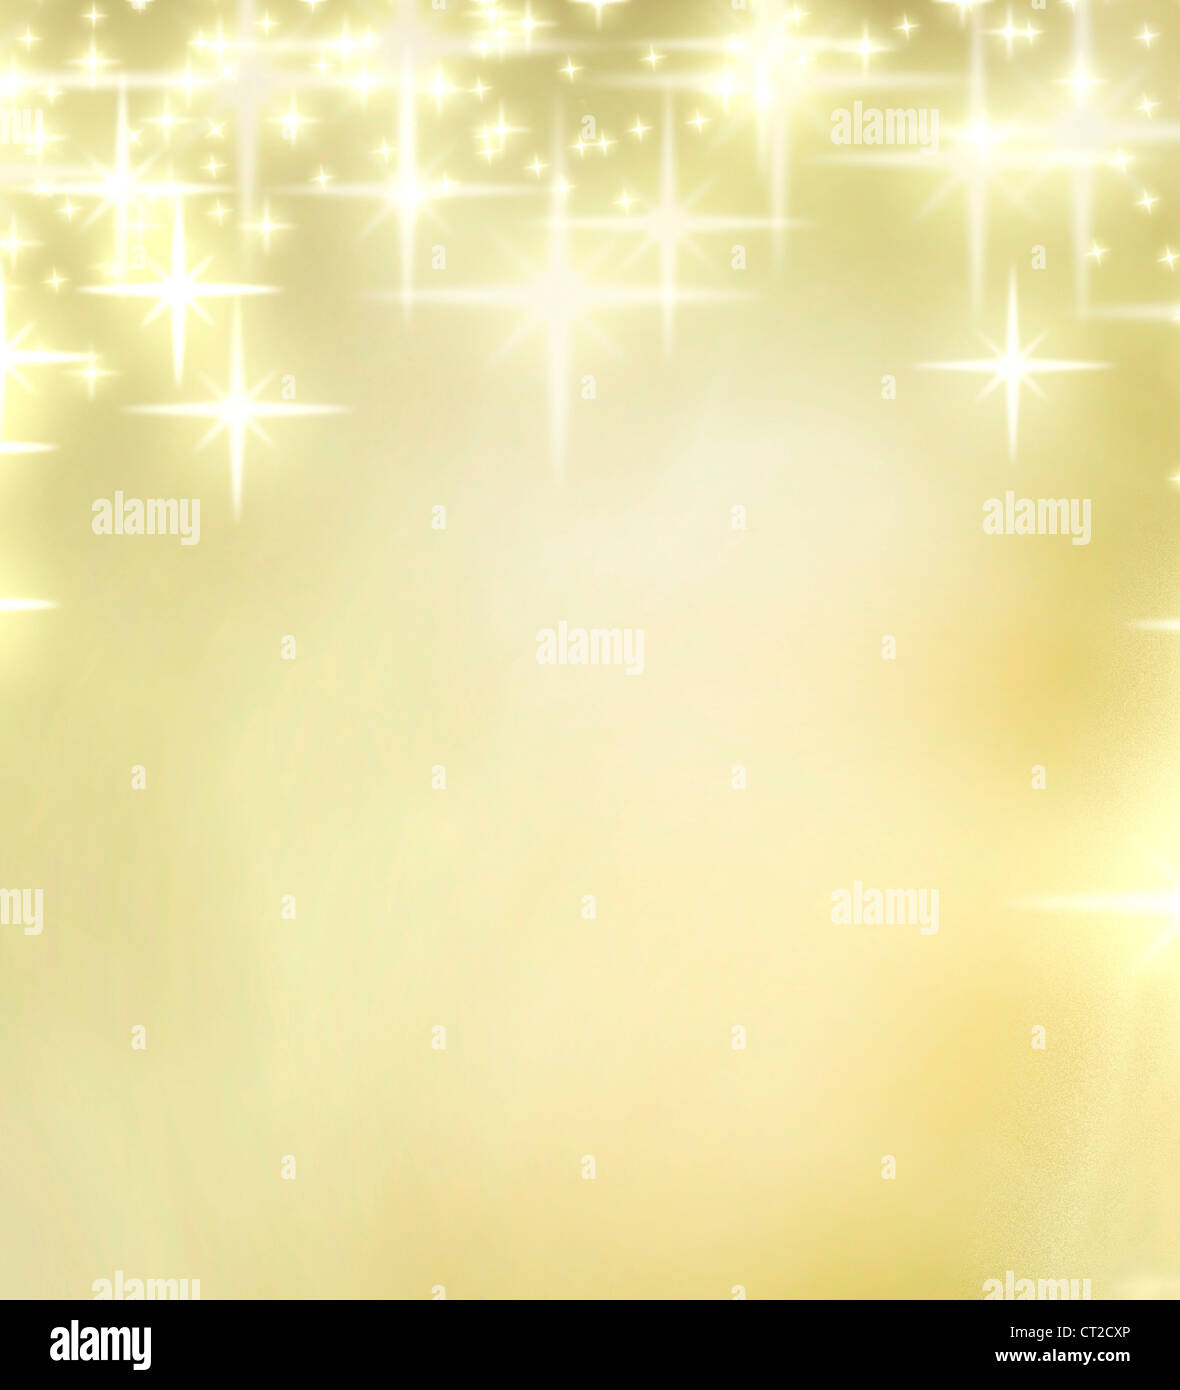 Christmas golden background with stars Stock Photo